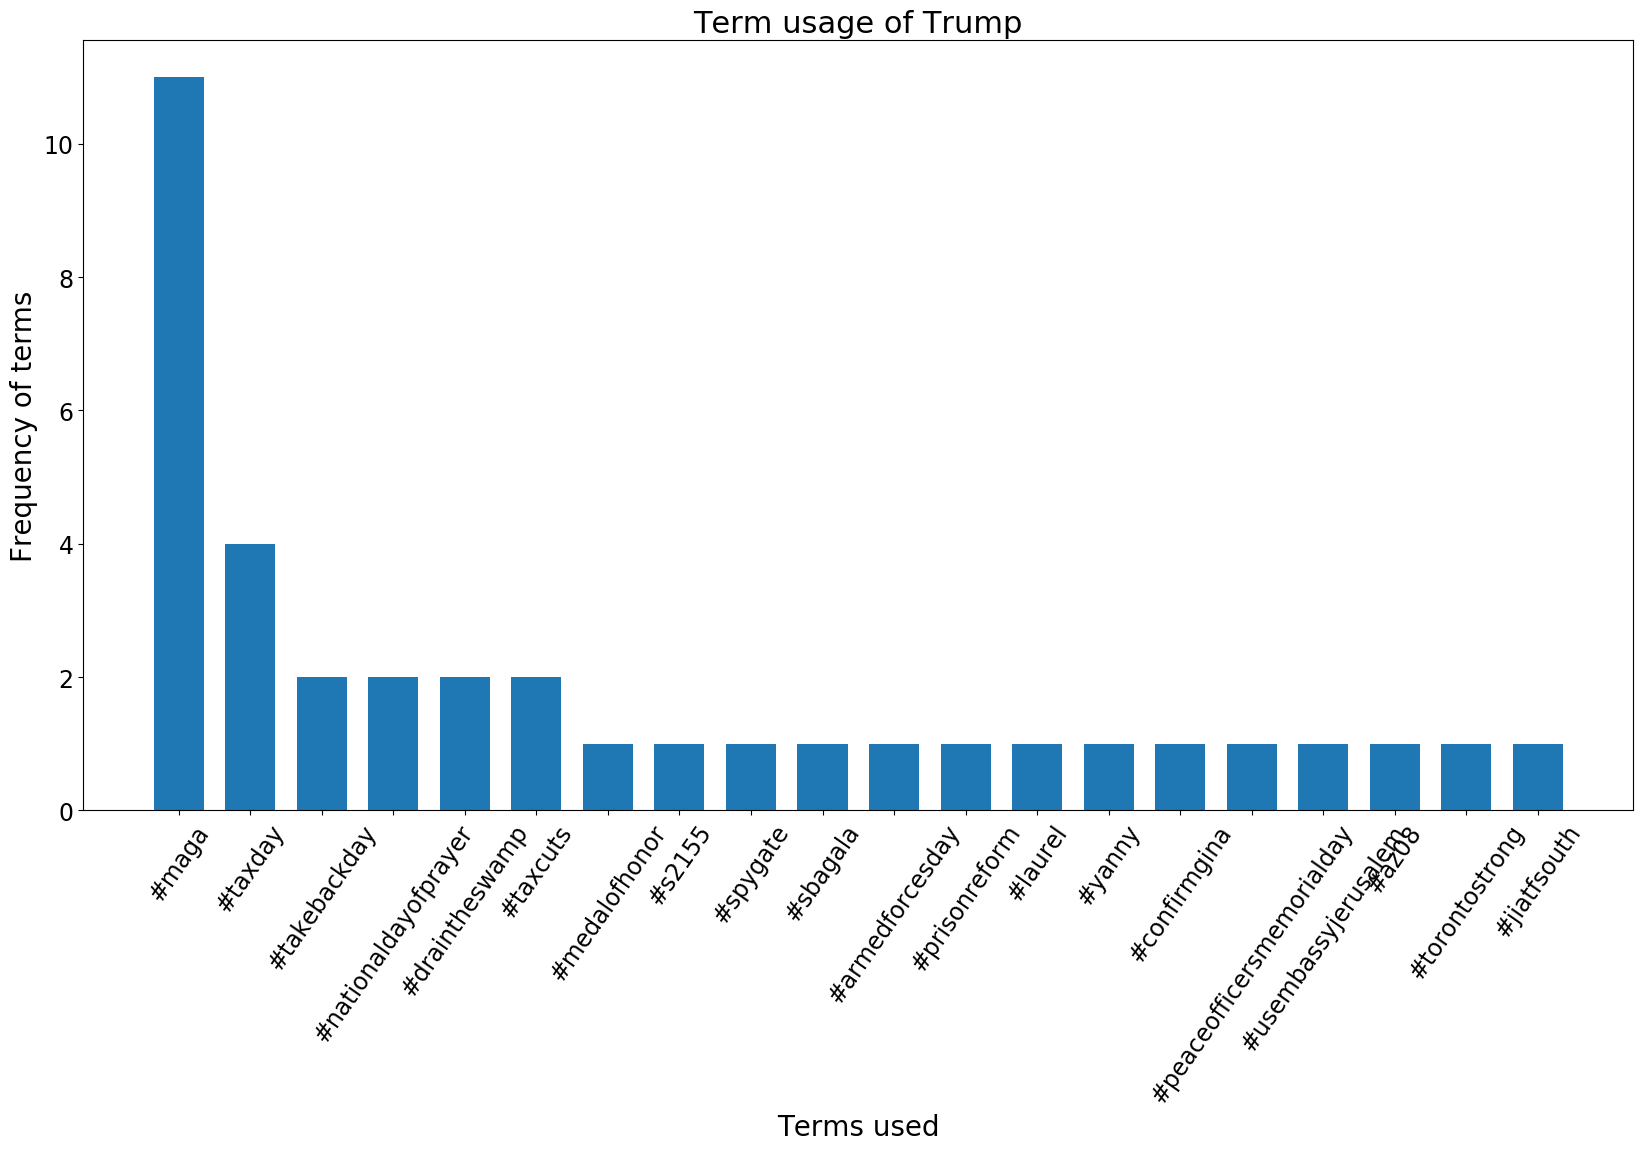 Trumps most commonly used hashtags in his 500 most recent tweets